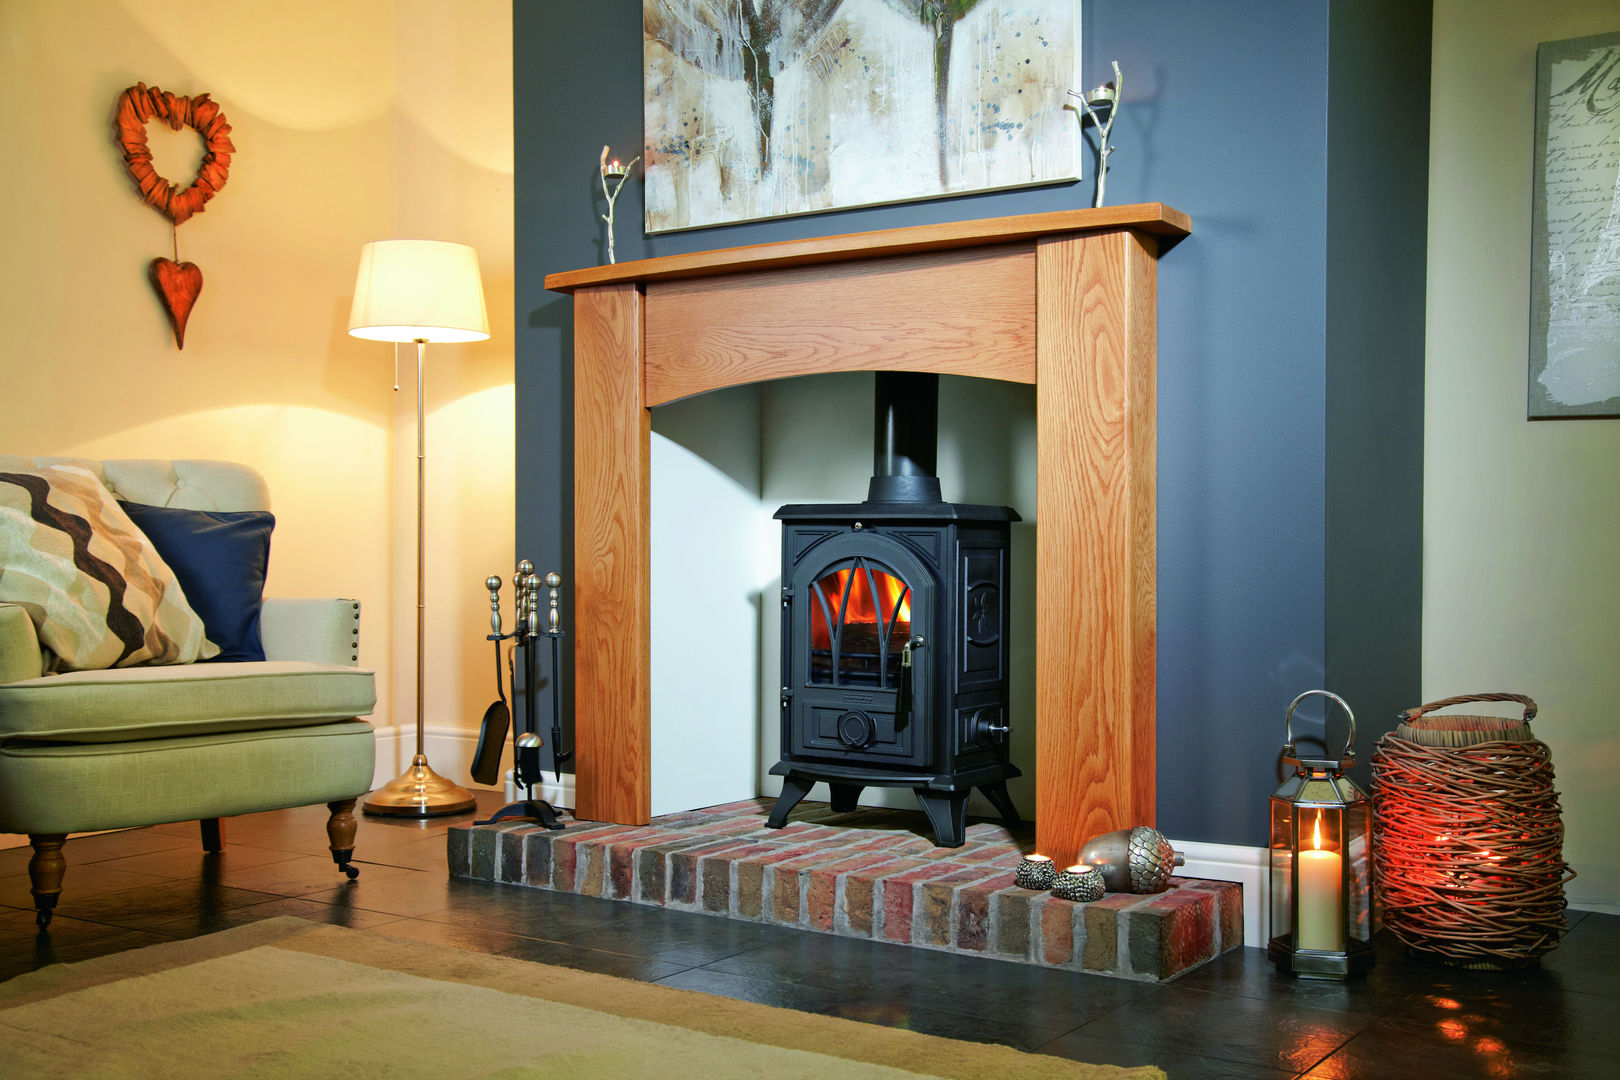 Portway One Fiveways Fires & Stoves Living room Fireplaces & accessories